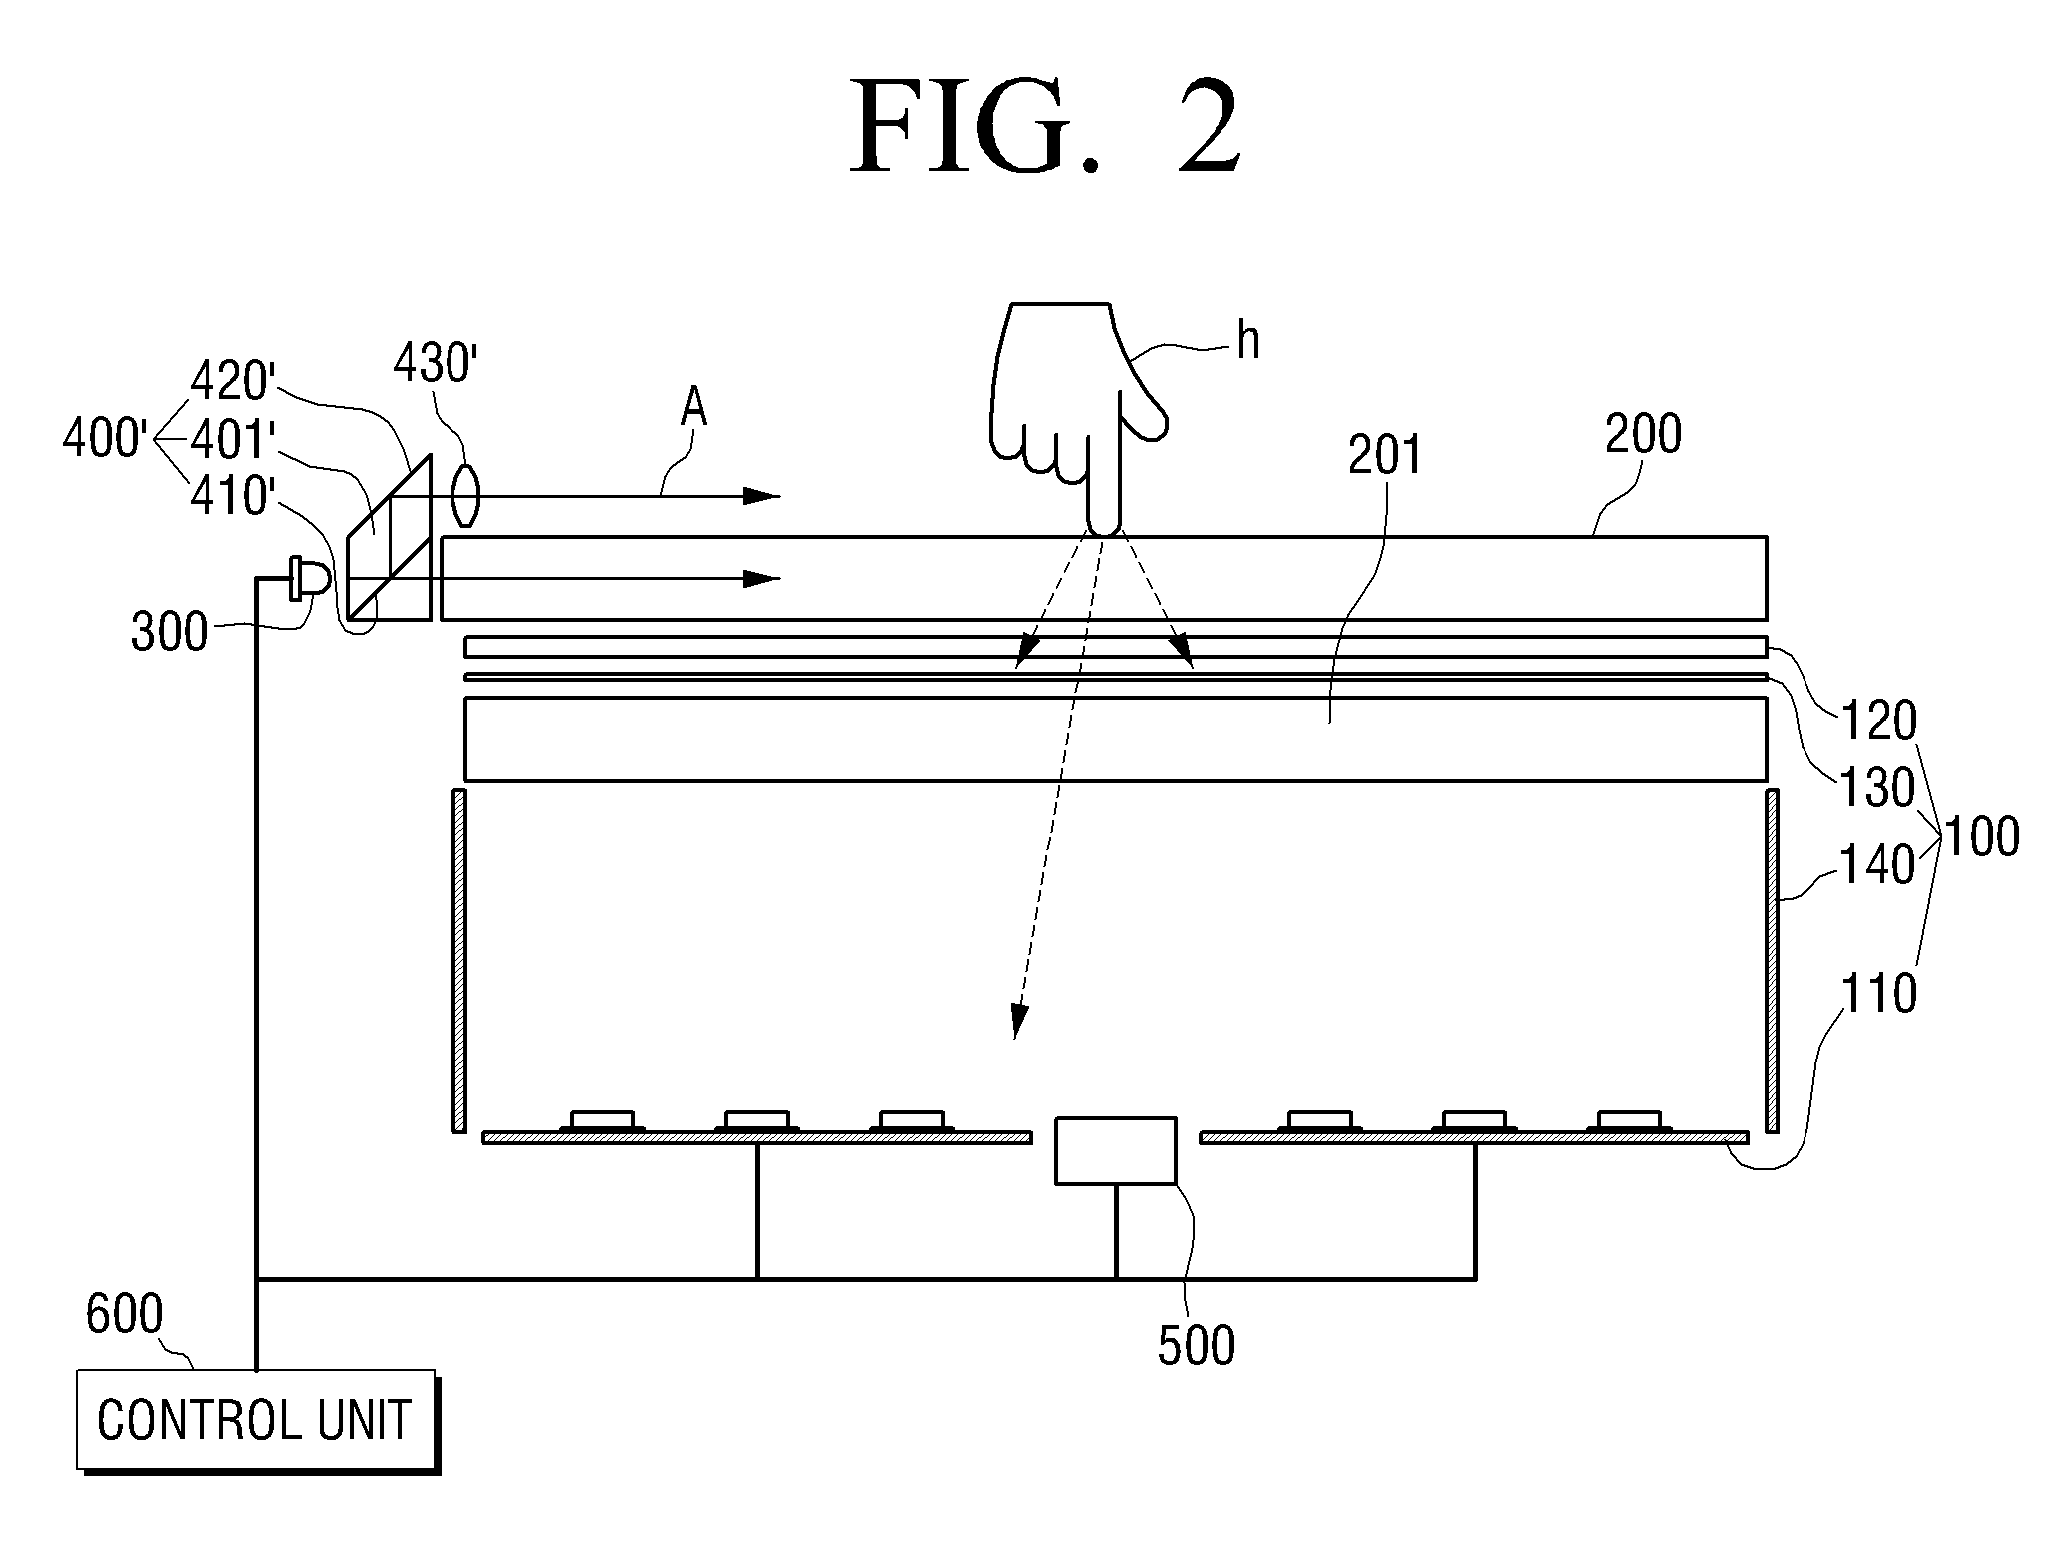 Multi-touch detecting appratus and method for LCD display apparatus